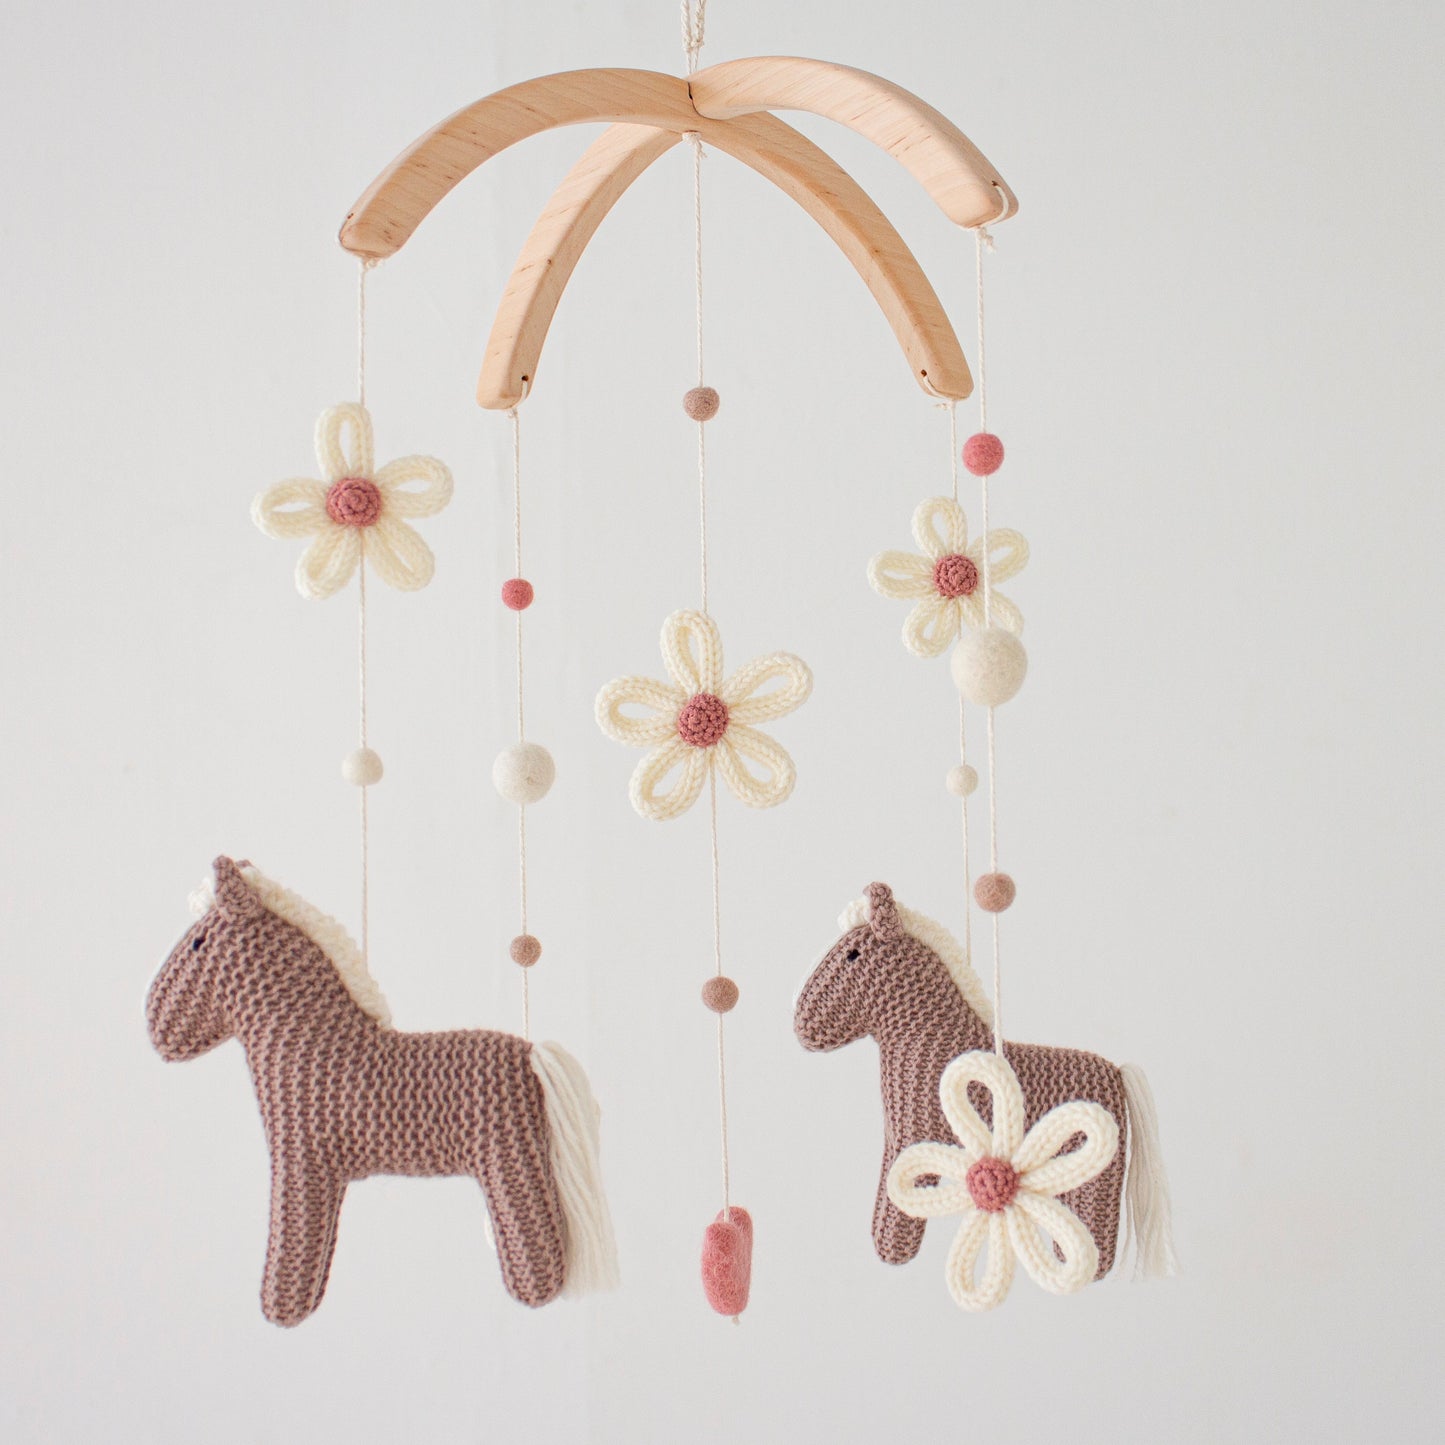 Cottagecore nursery mobile with horses & daisies